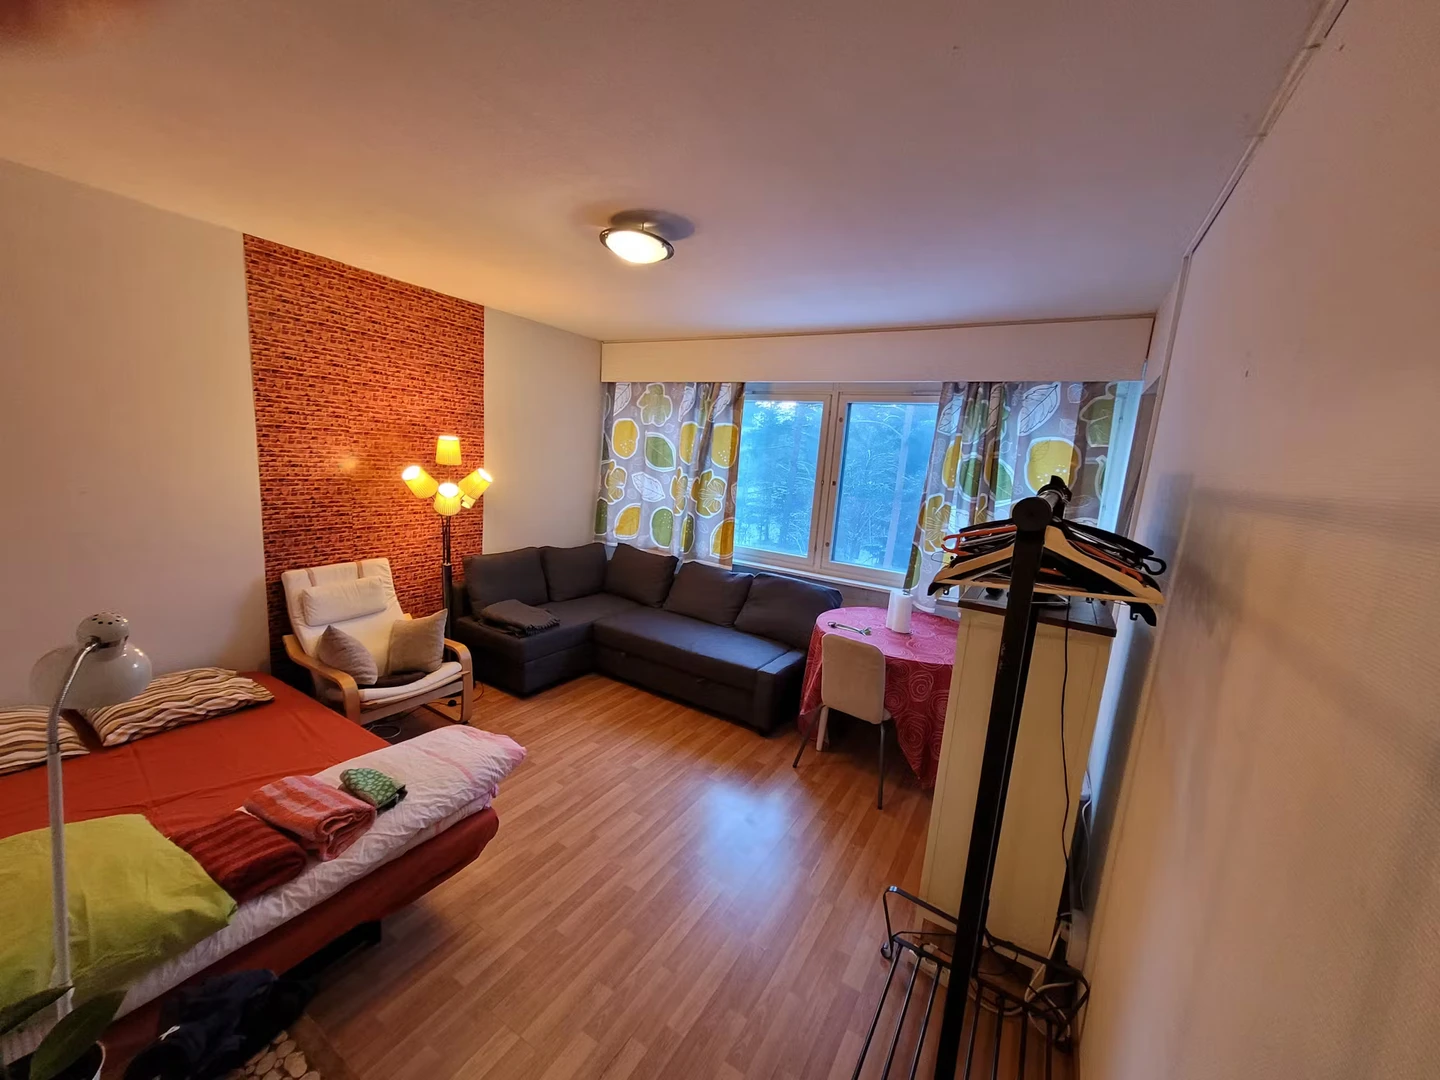 Accommodation with 3 bedrooms in Espoo